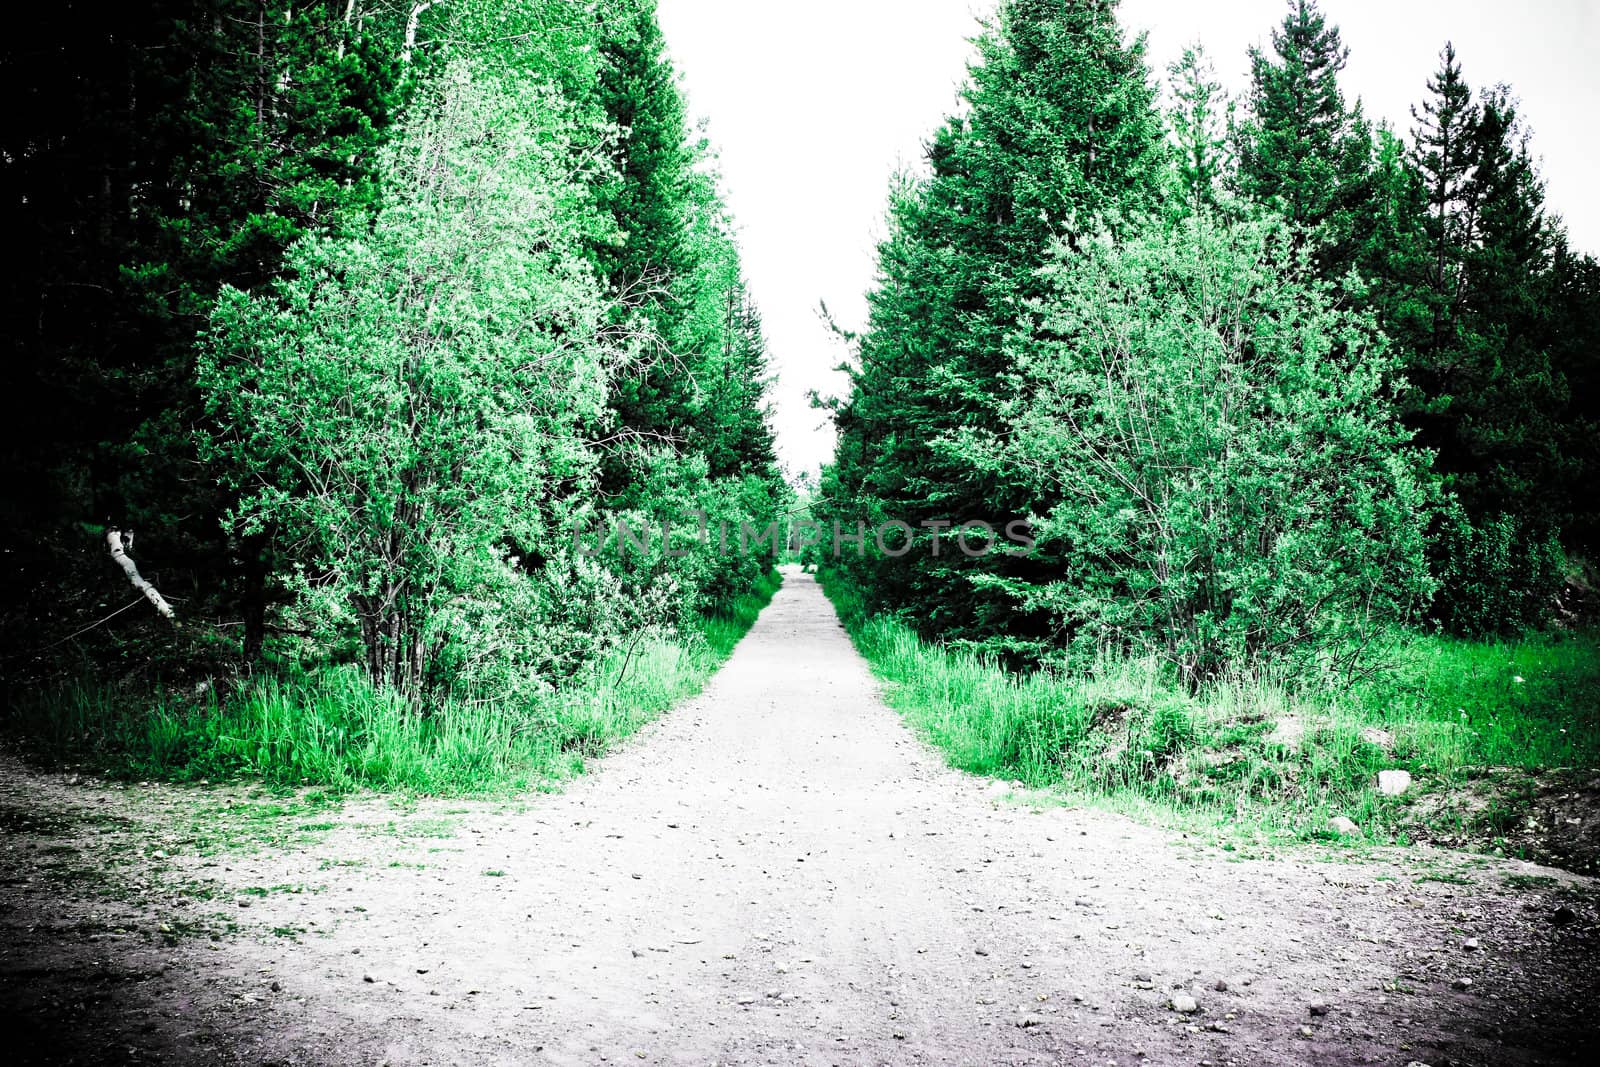 creative photo of forest road in summer time
